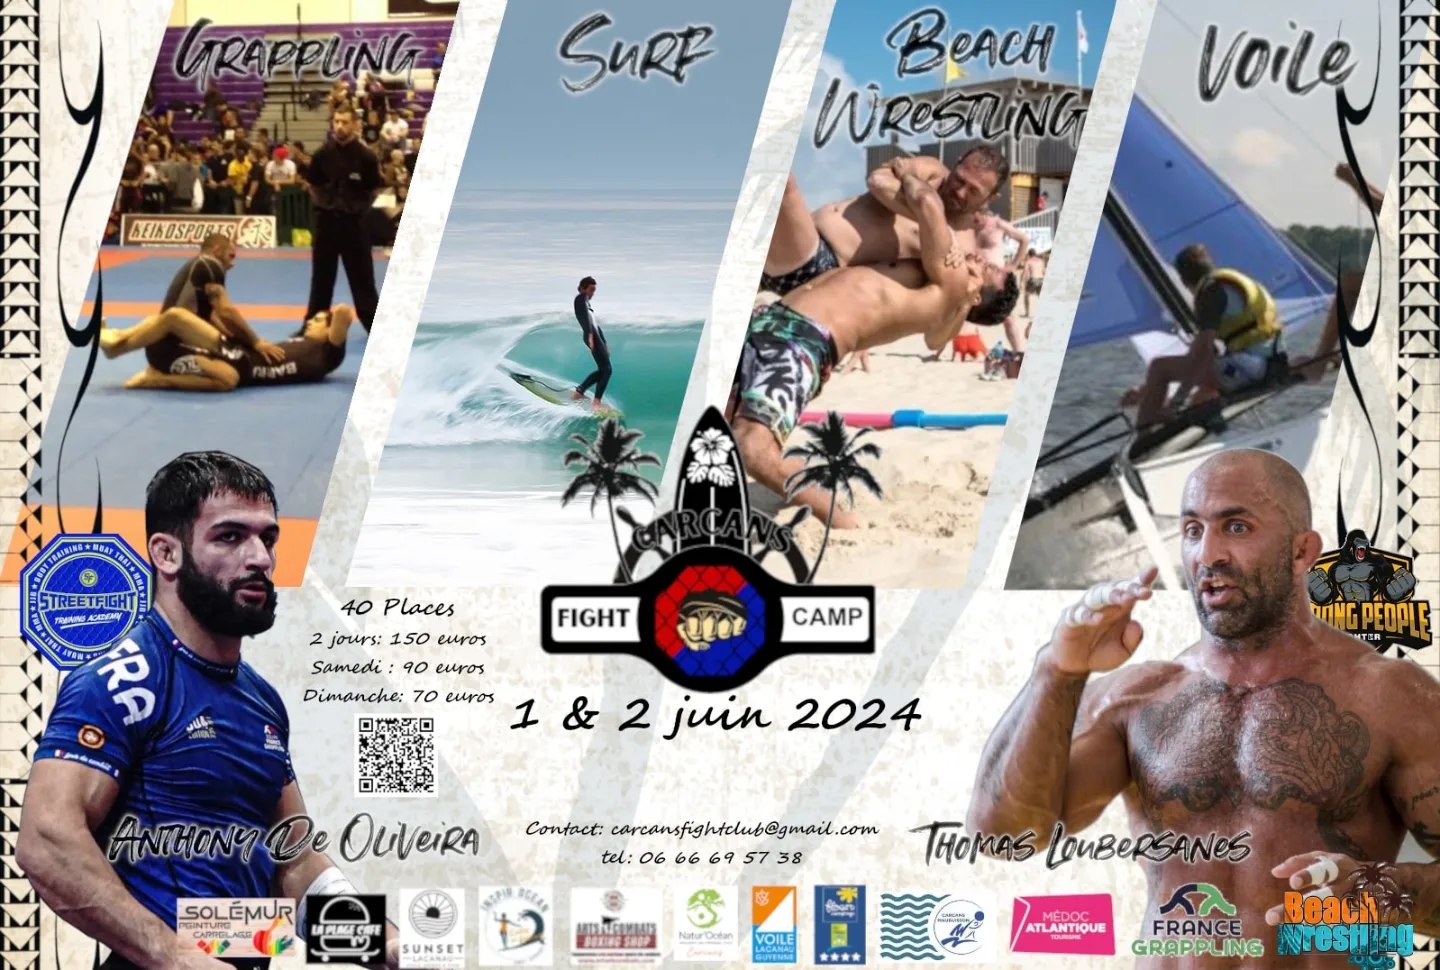 Carcans Fight Camp (Stage grappling,surf, voil ...